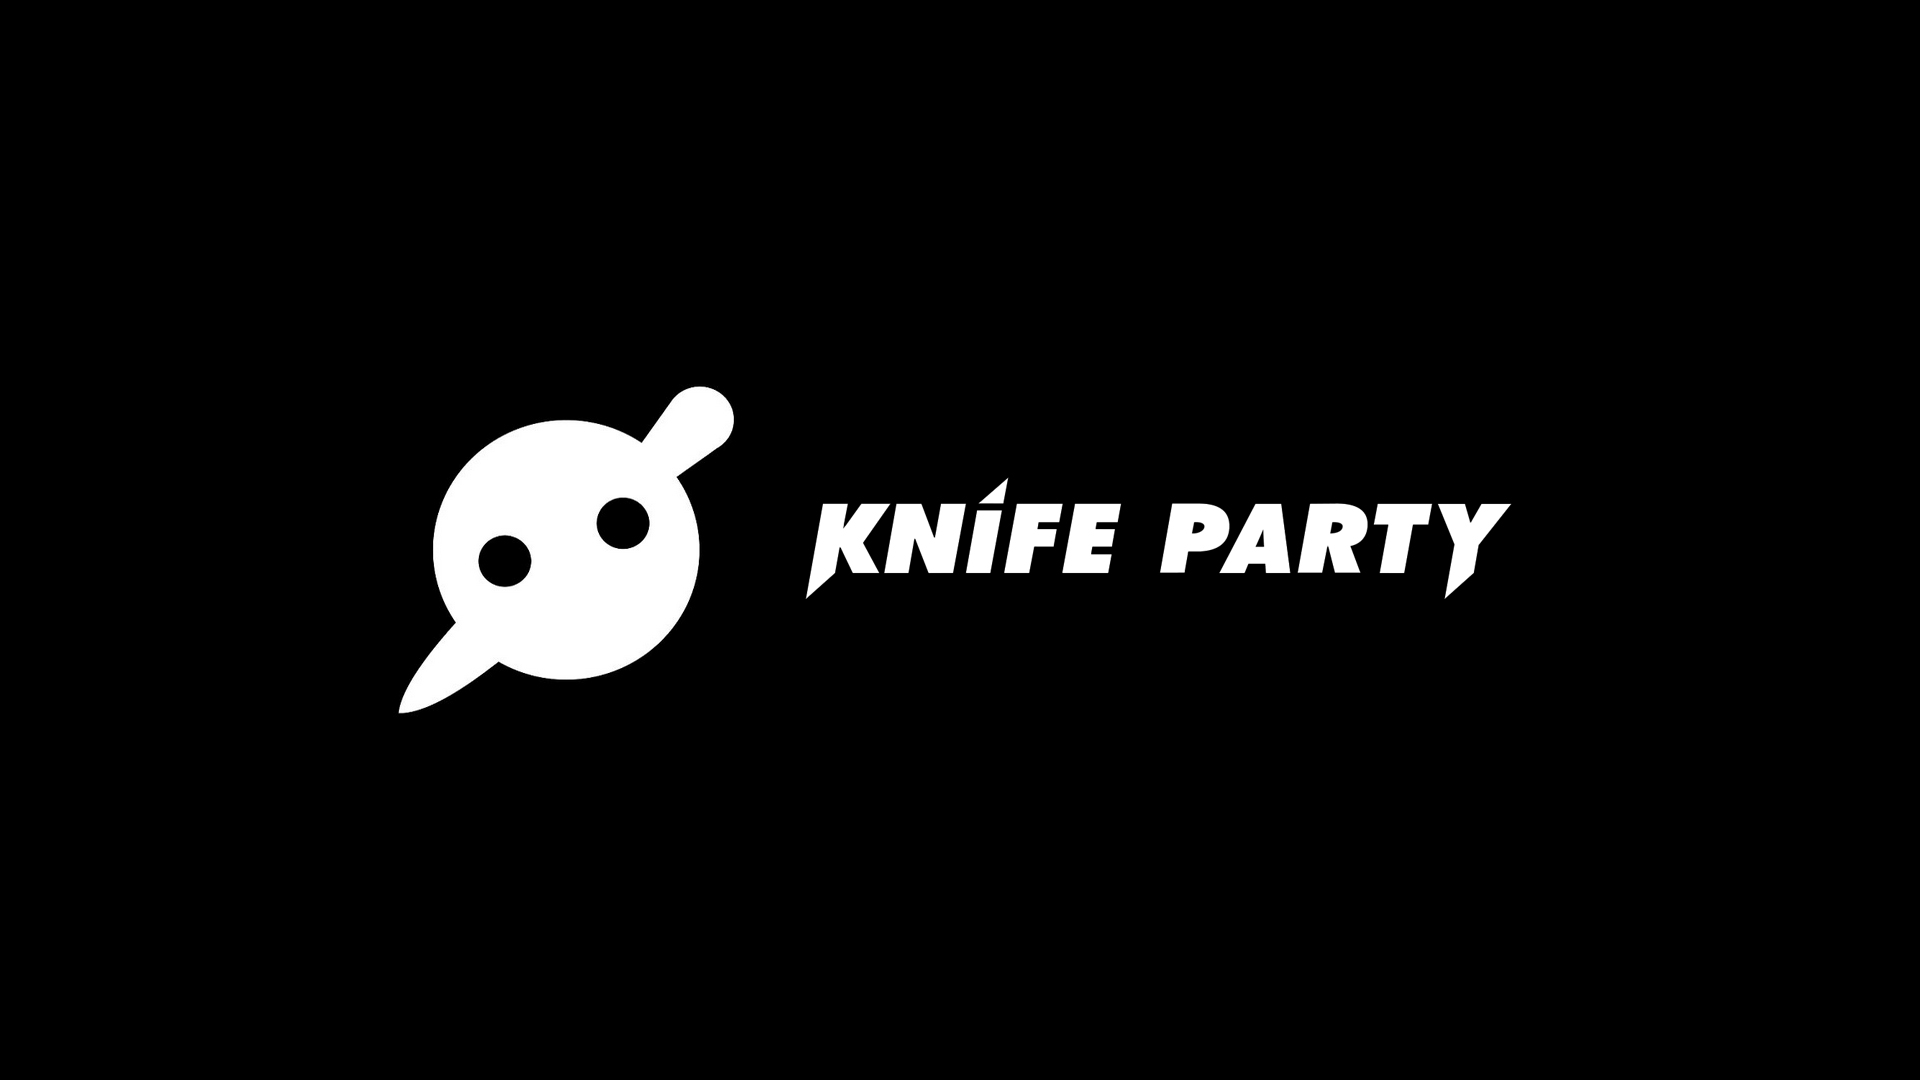 Knife Party Wallpaper By Caboose6789